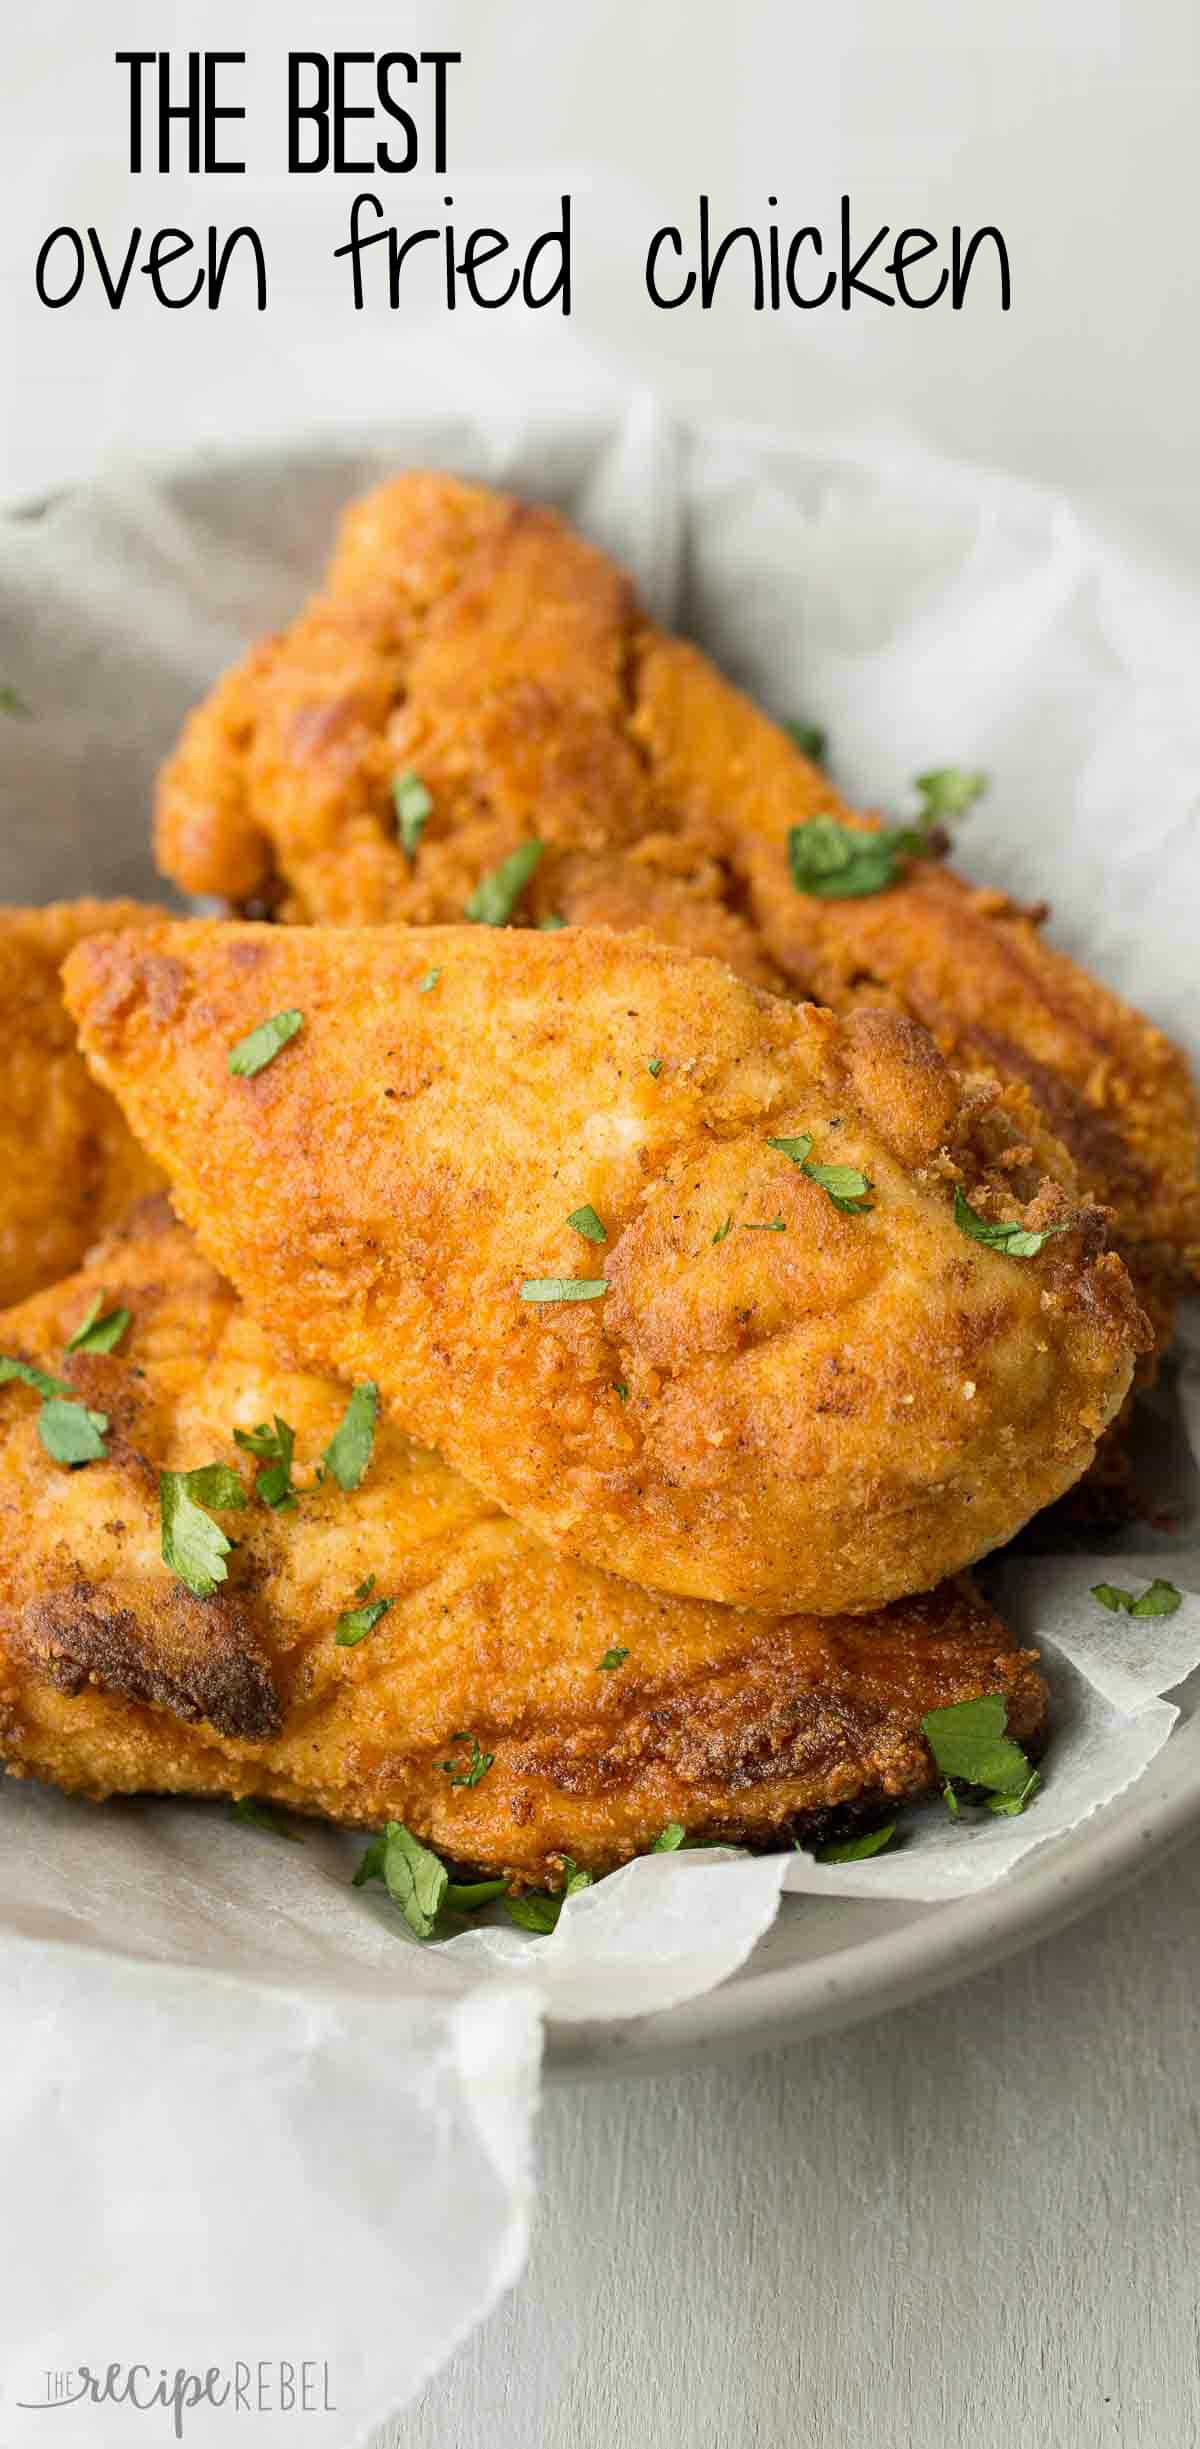 Best Oven Fried Chicken
 Best Ever Chicken Recipes from Top Food Bloggers Yellow